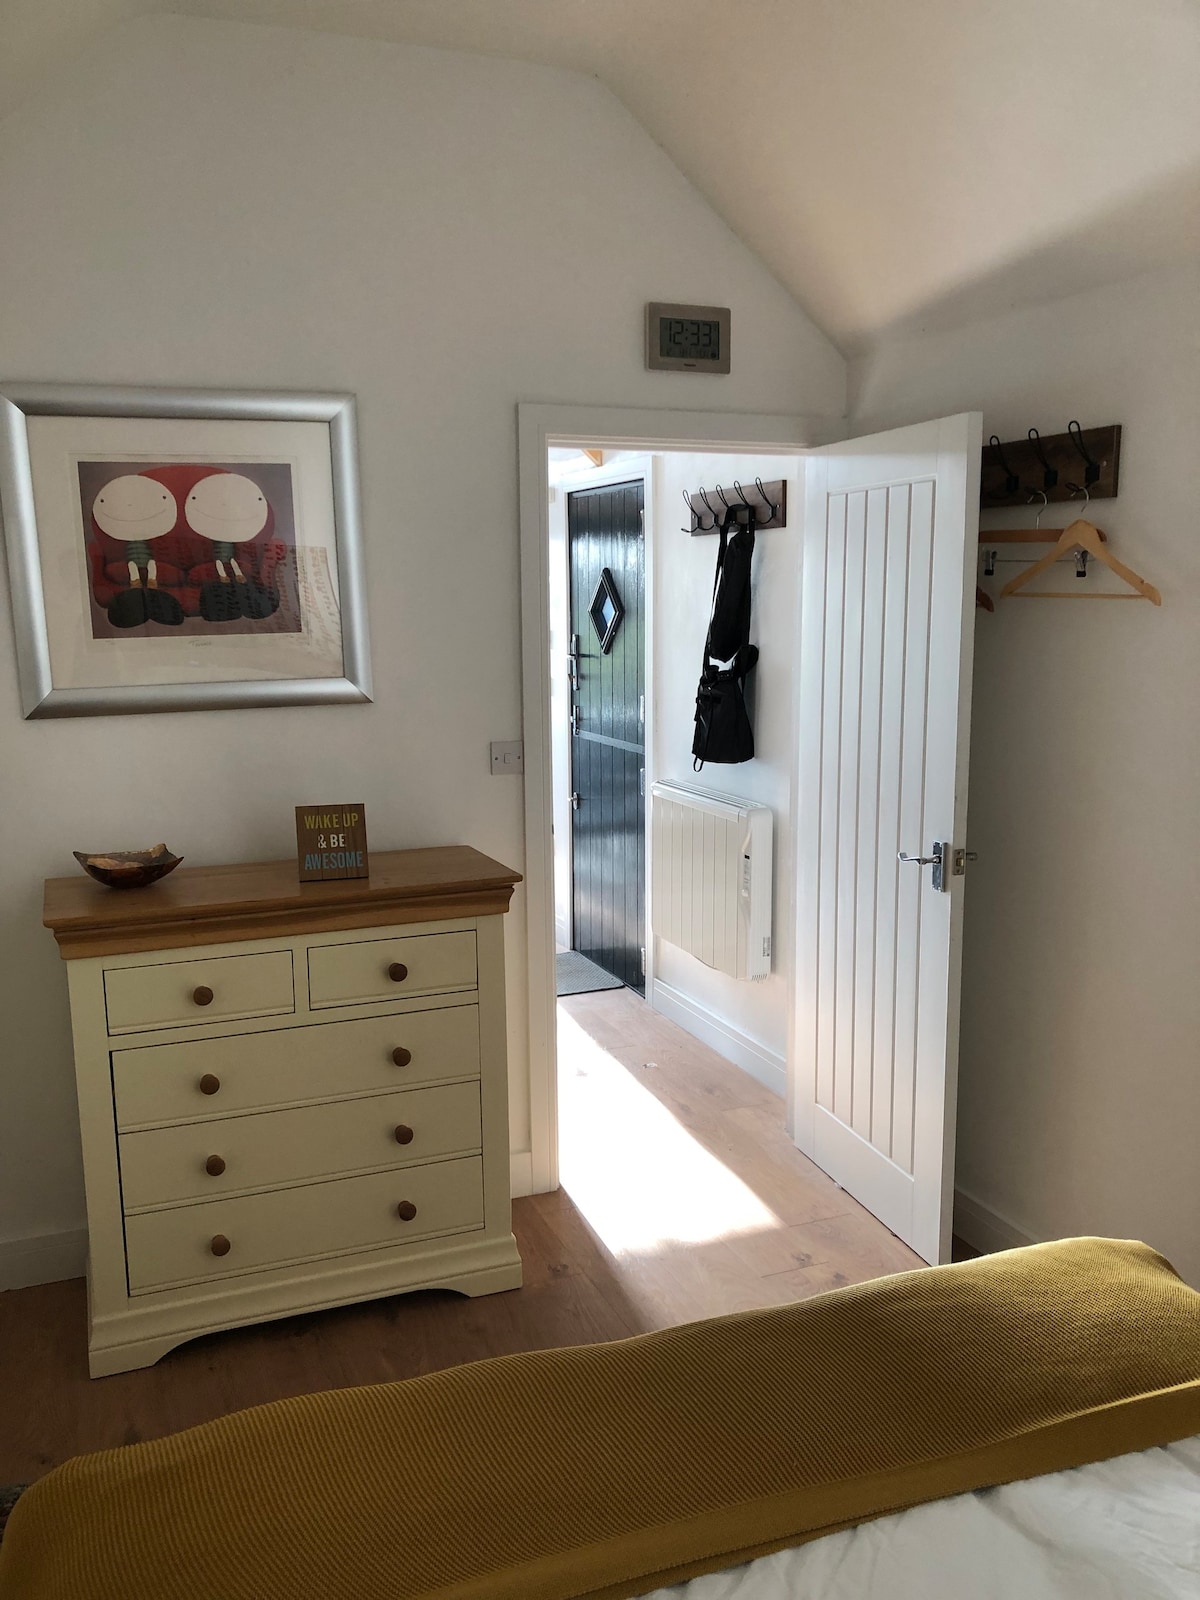 Self-contained suite in Clevedon